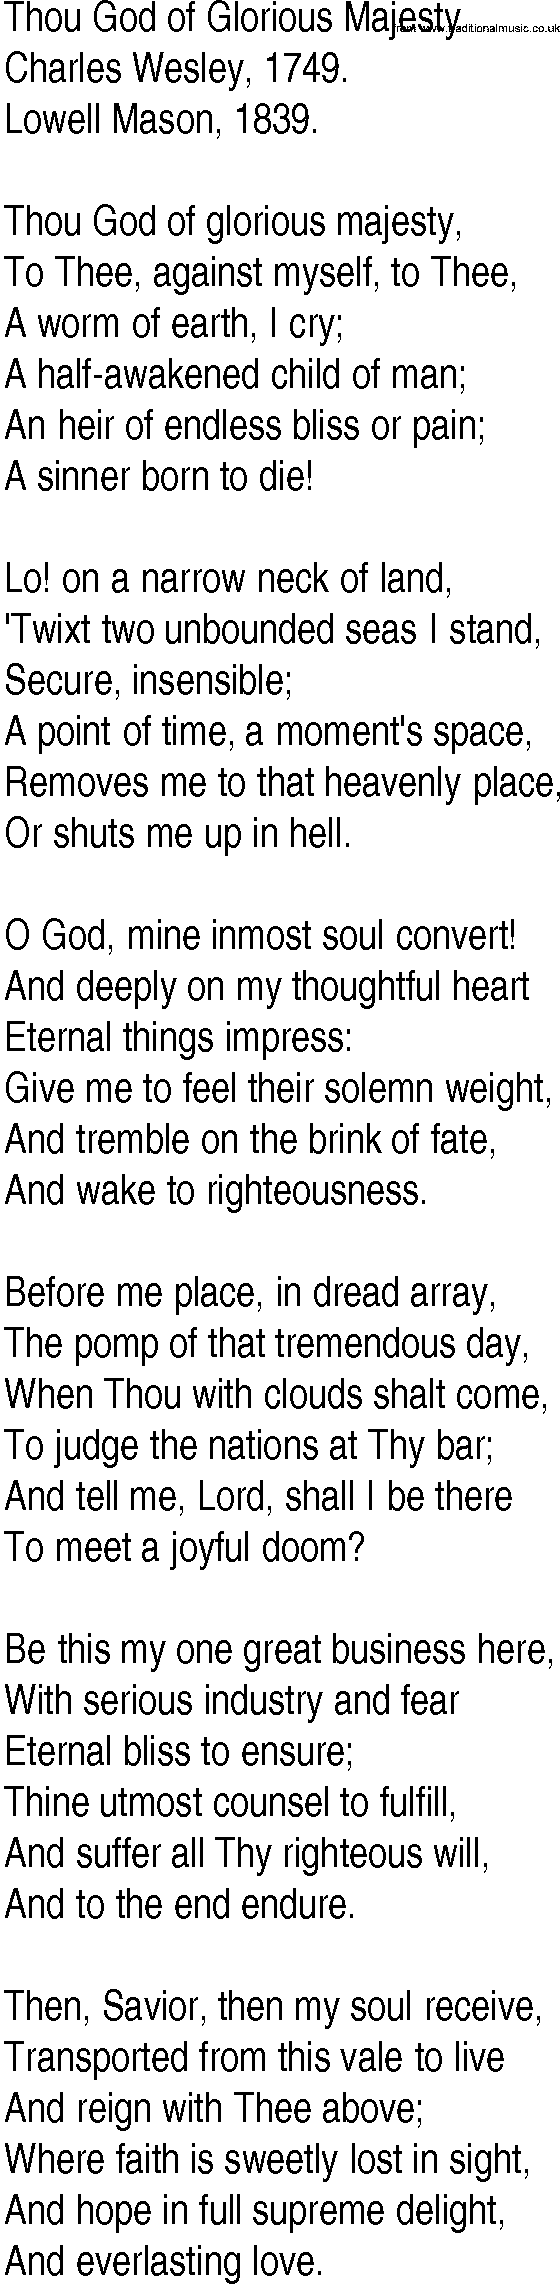 Hymn and Gospel Song: Thou God of Glorious Majesty by Charles Wesley lyrics